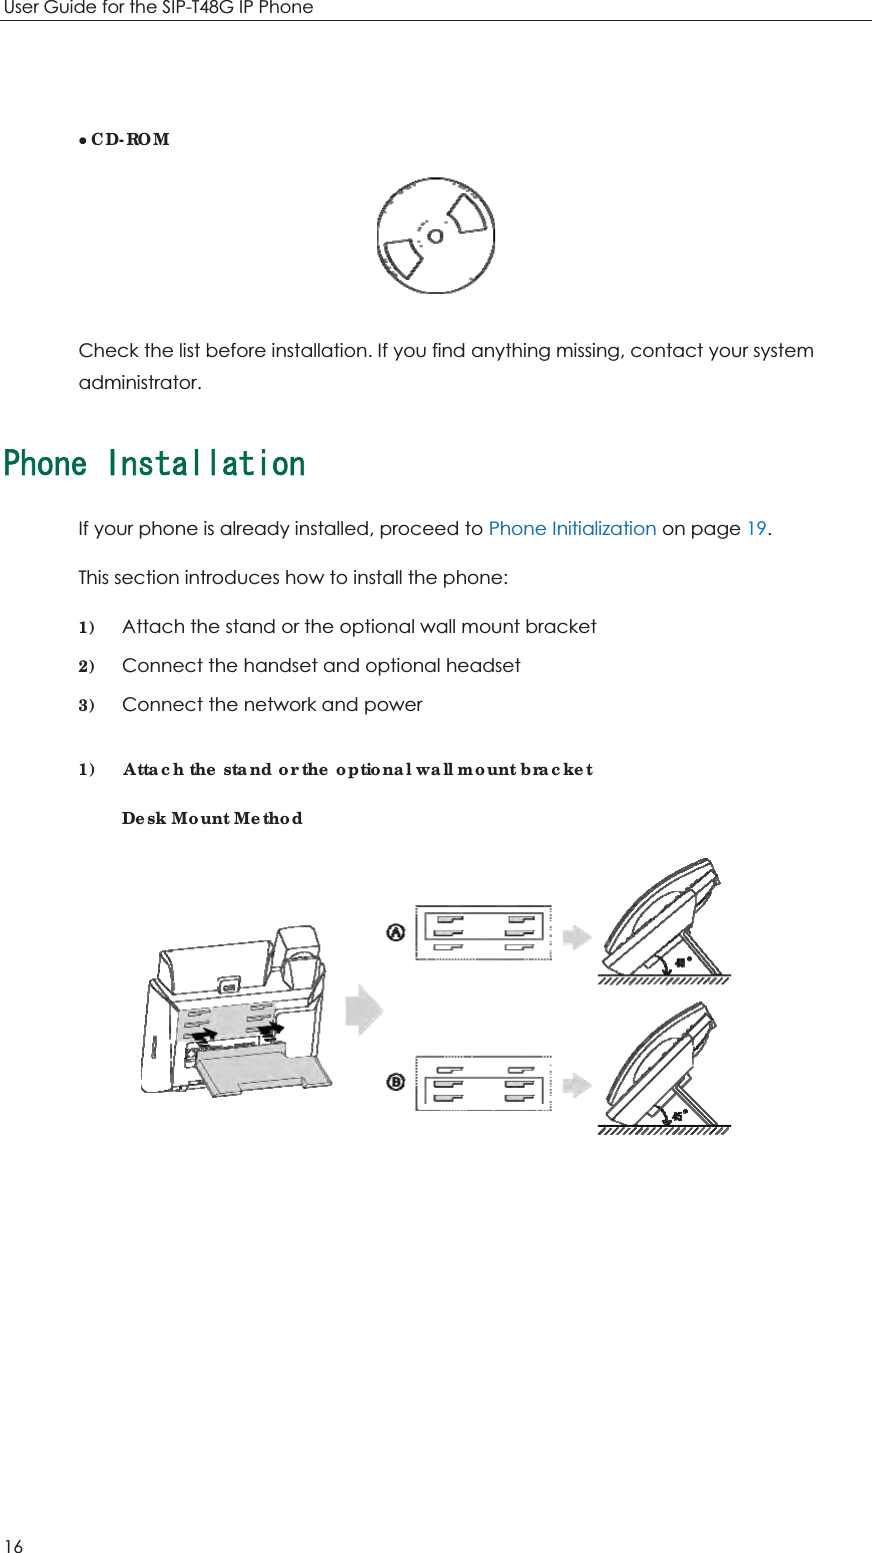 User Guide for the SIP-T48G IP Phone 16  zCD-ROM  Check the list before installation. If you find anything missing, contact your system administrator. 2JQPG+PUVCNNCVKQPIf your phone is already installed, proceed to Phone Initialization on page 19. This section introduces how to install the phone: 1) Attach the stand or the optional wall mount bracket 2) Connect the handset and optional headset 3) Connect the network and power 1)    Attach the stand or the optional wall mount bracket Desk Mount Method  